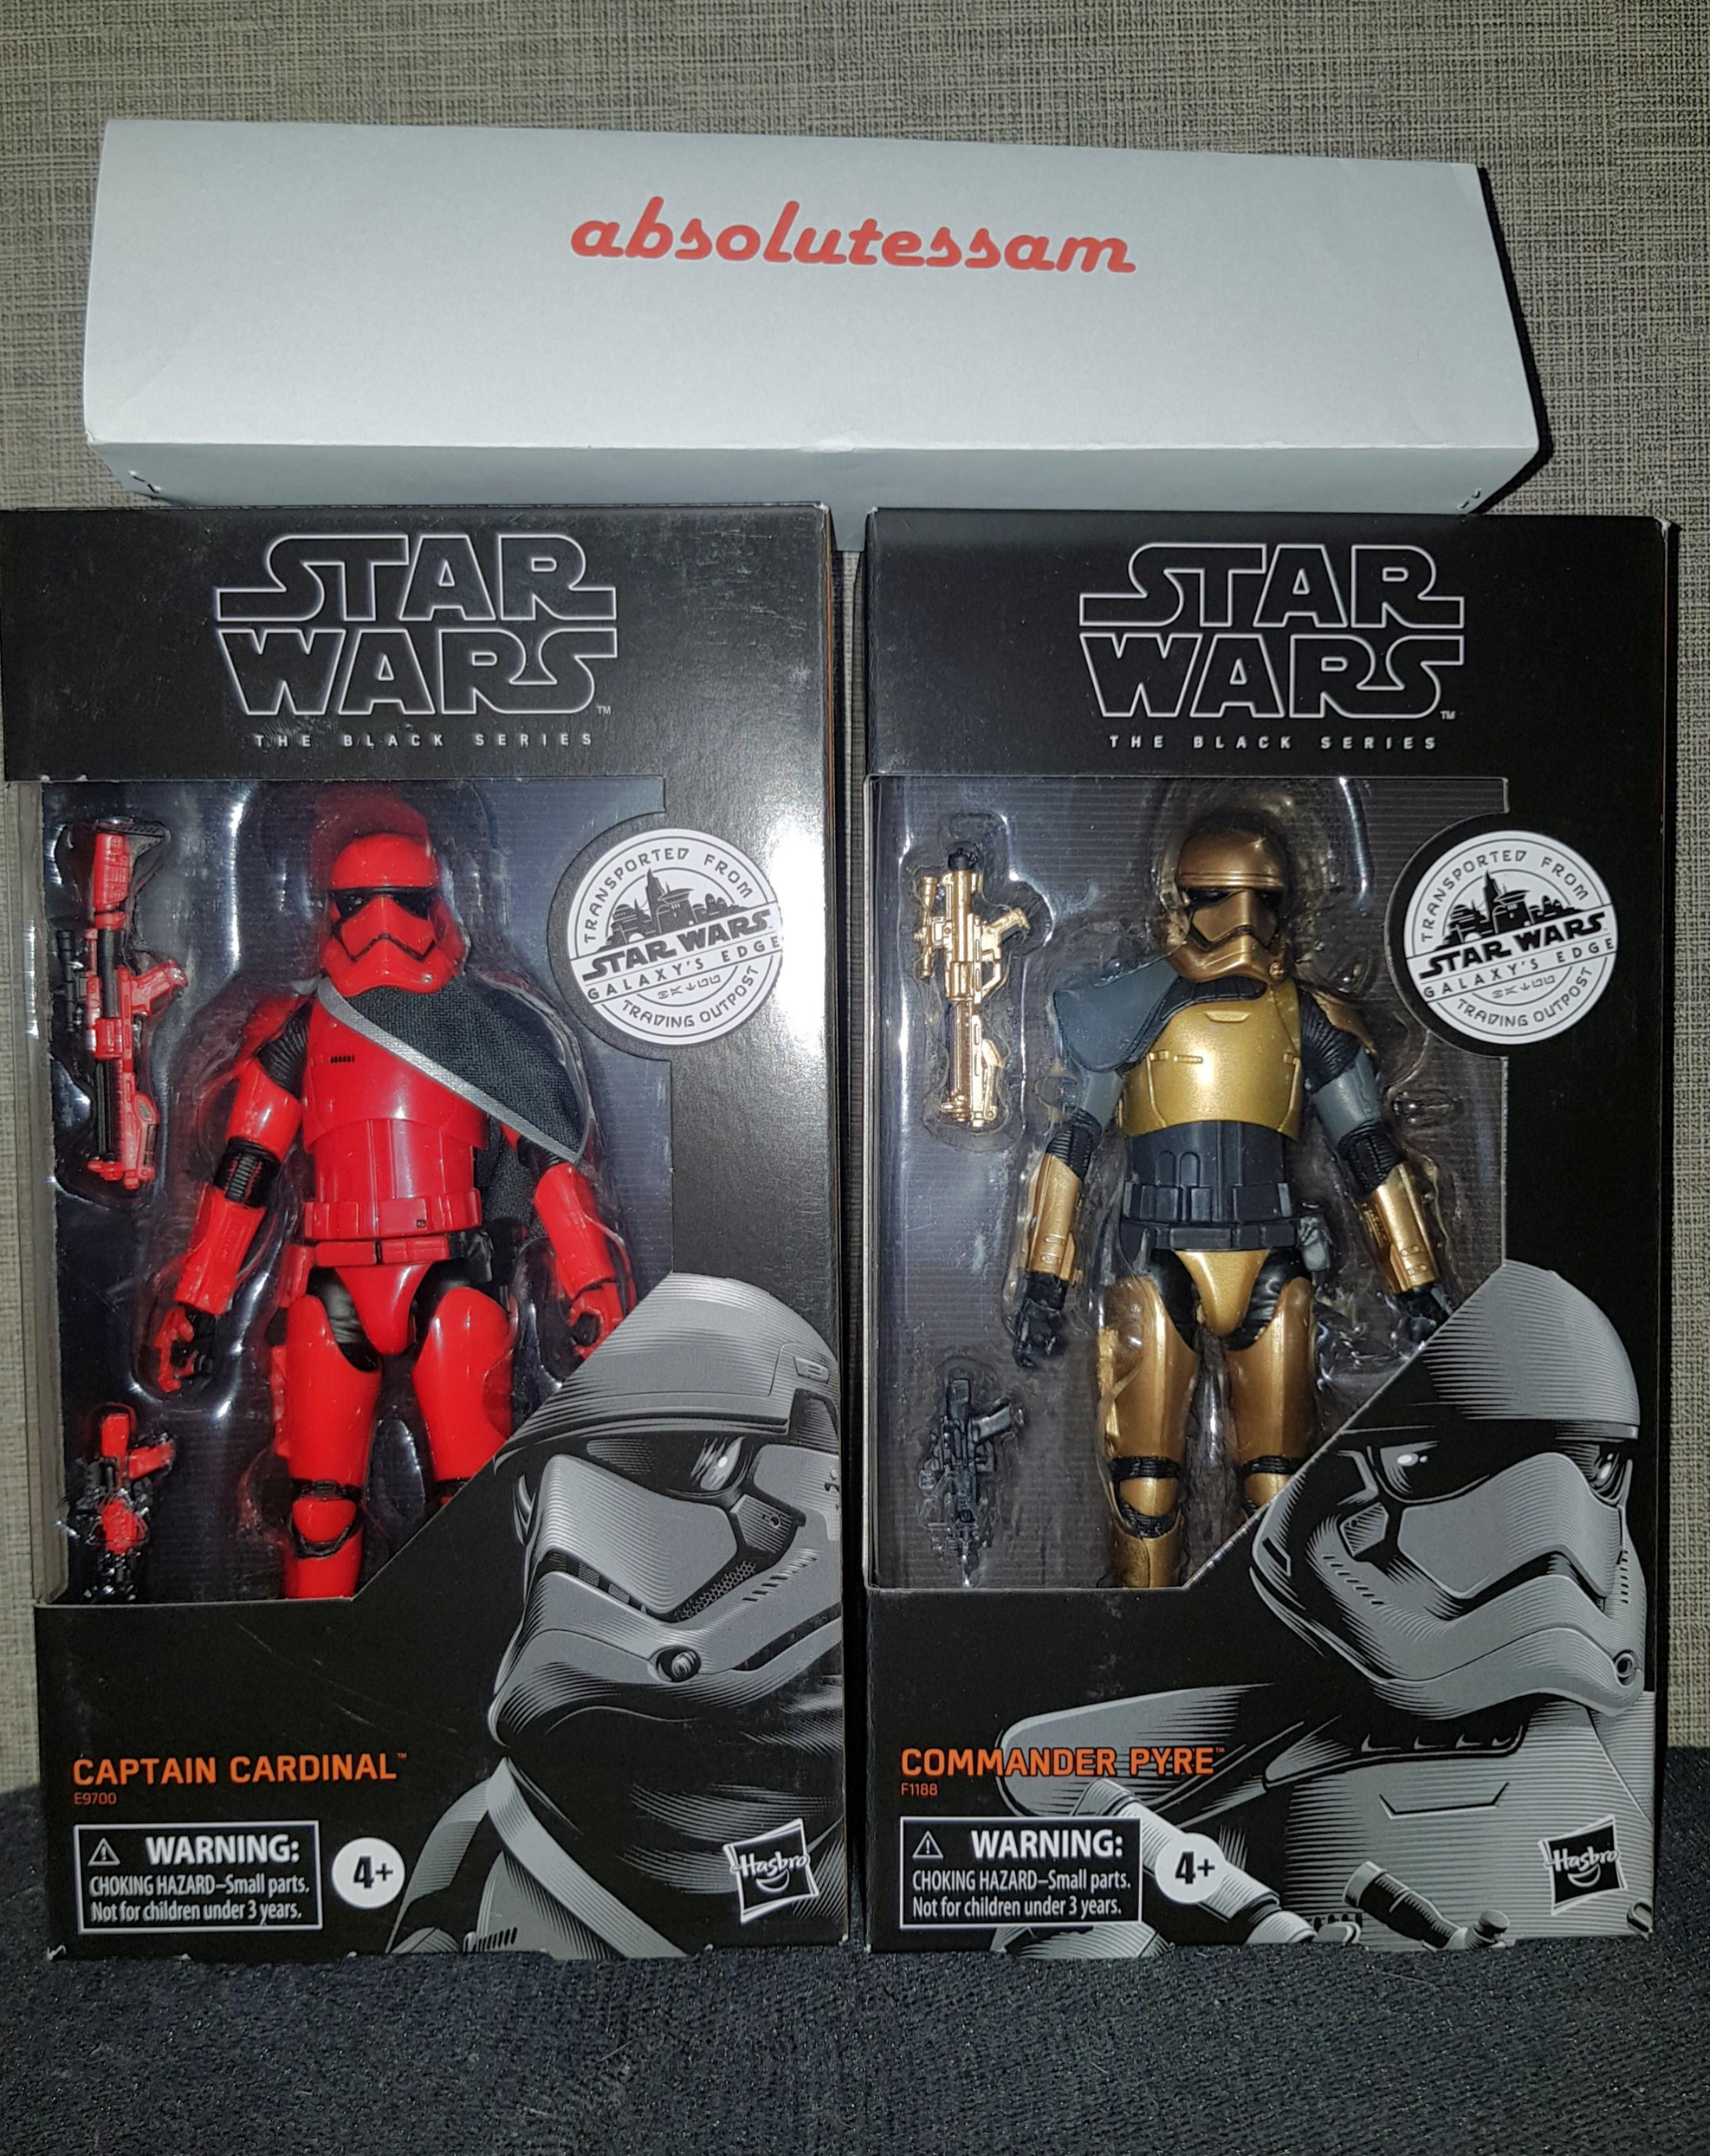 Mint In Box Star Wars Black Series Captain Cardinal Galaxy S Edge Exclusive Toys Hobbies Lenka Creations Action Figures - roblox commander pyre